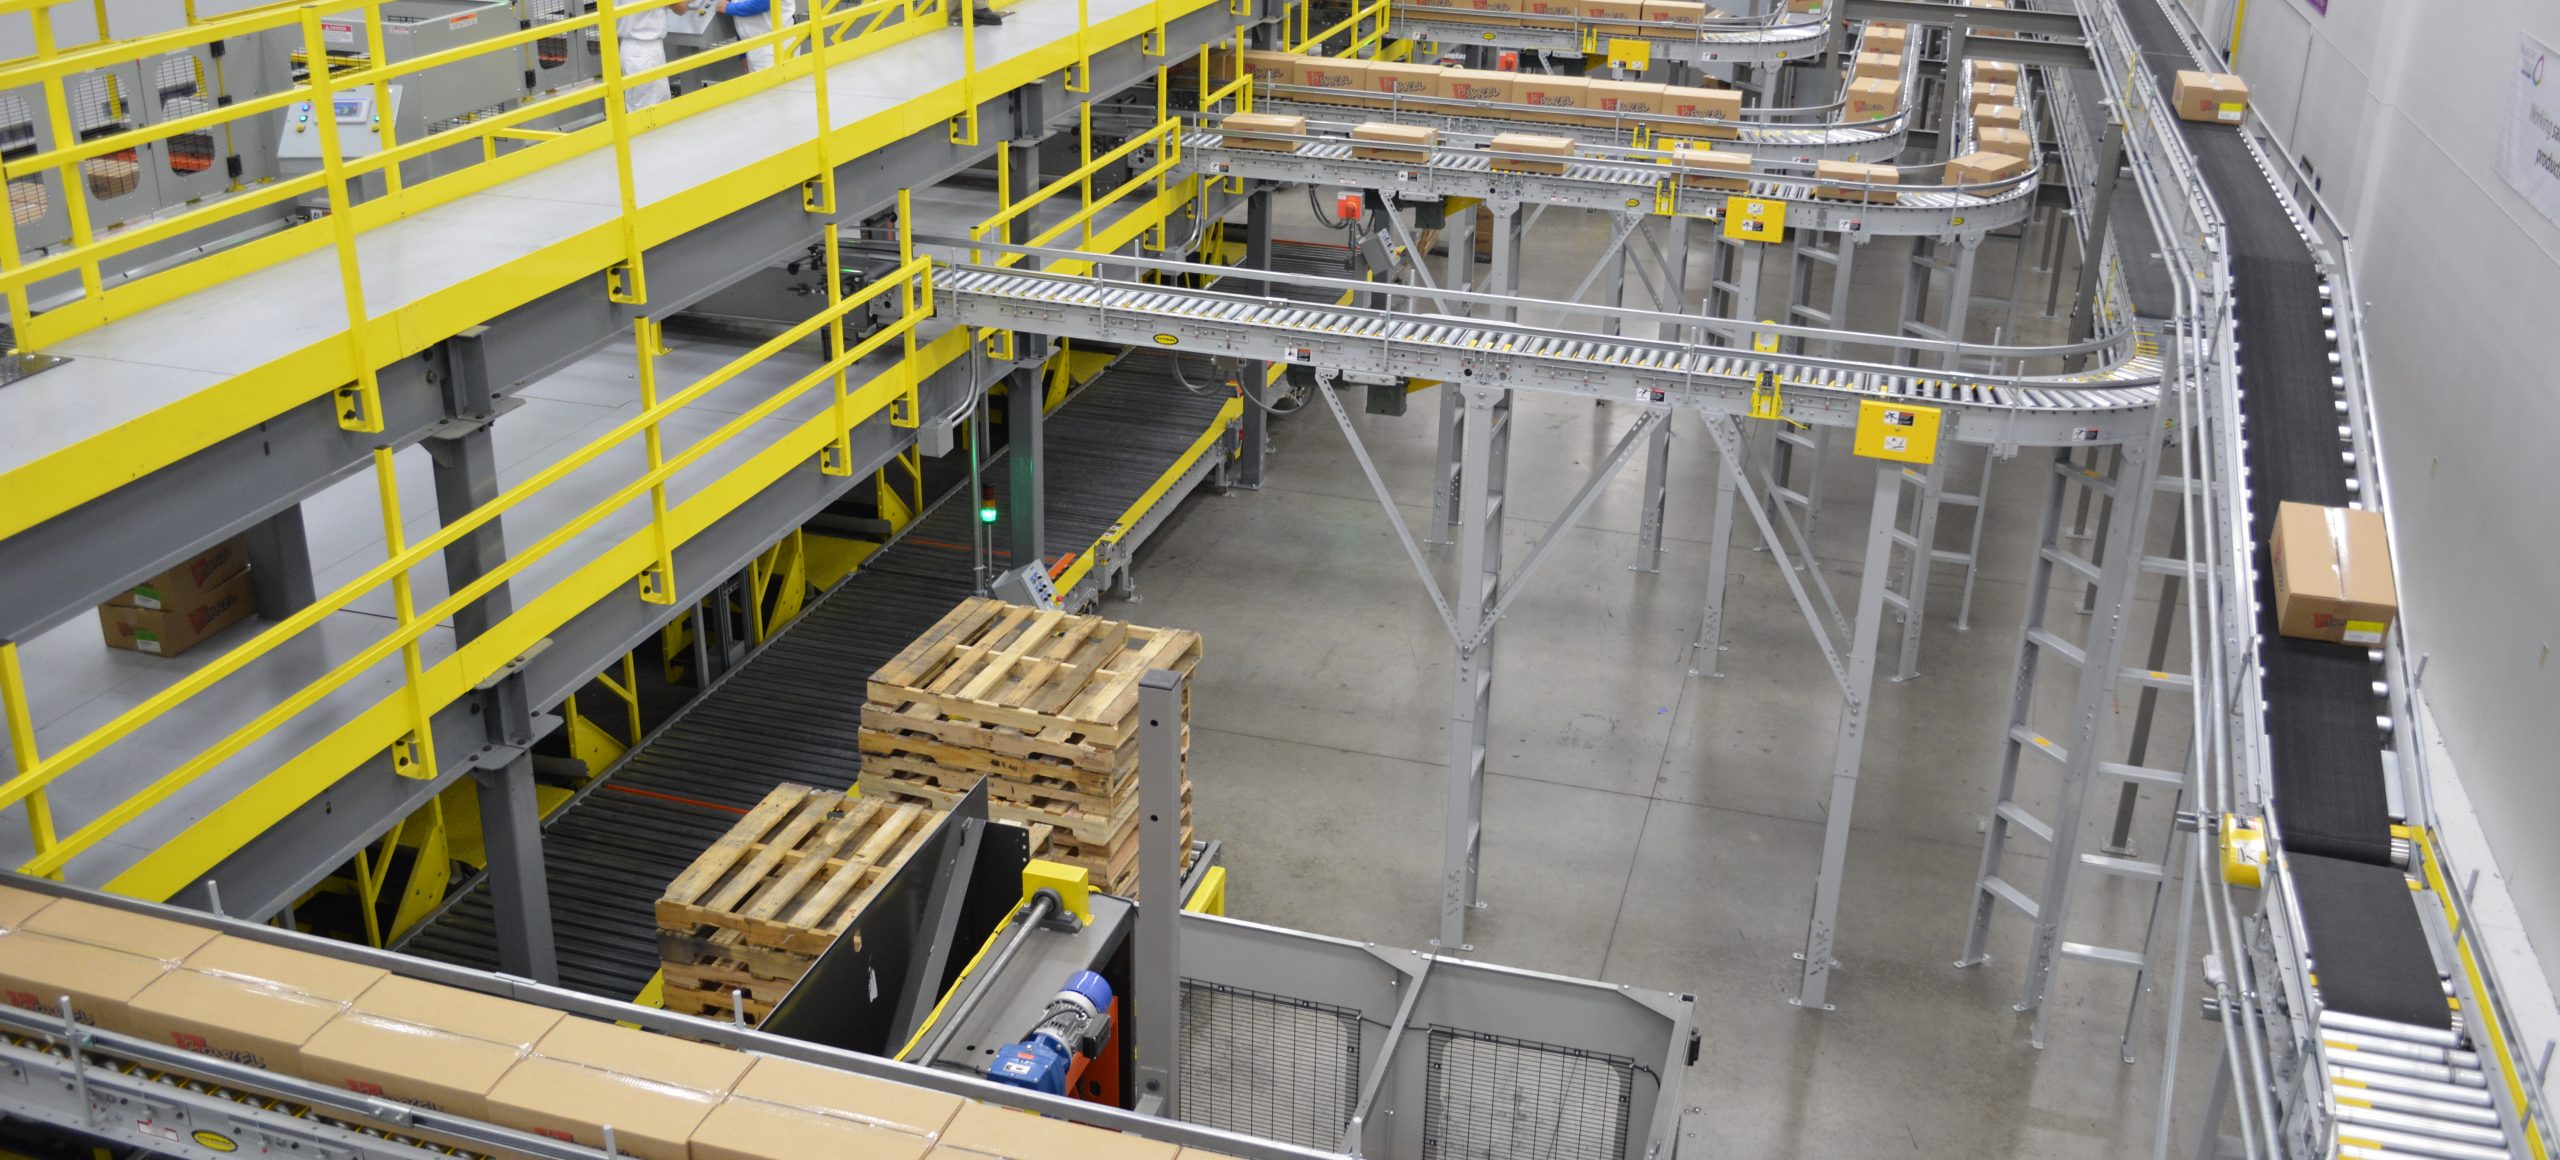 Image of multiple infeed conveyors moving product cases.